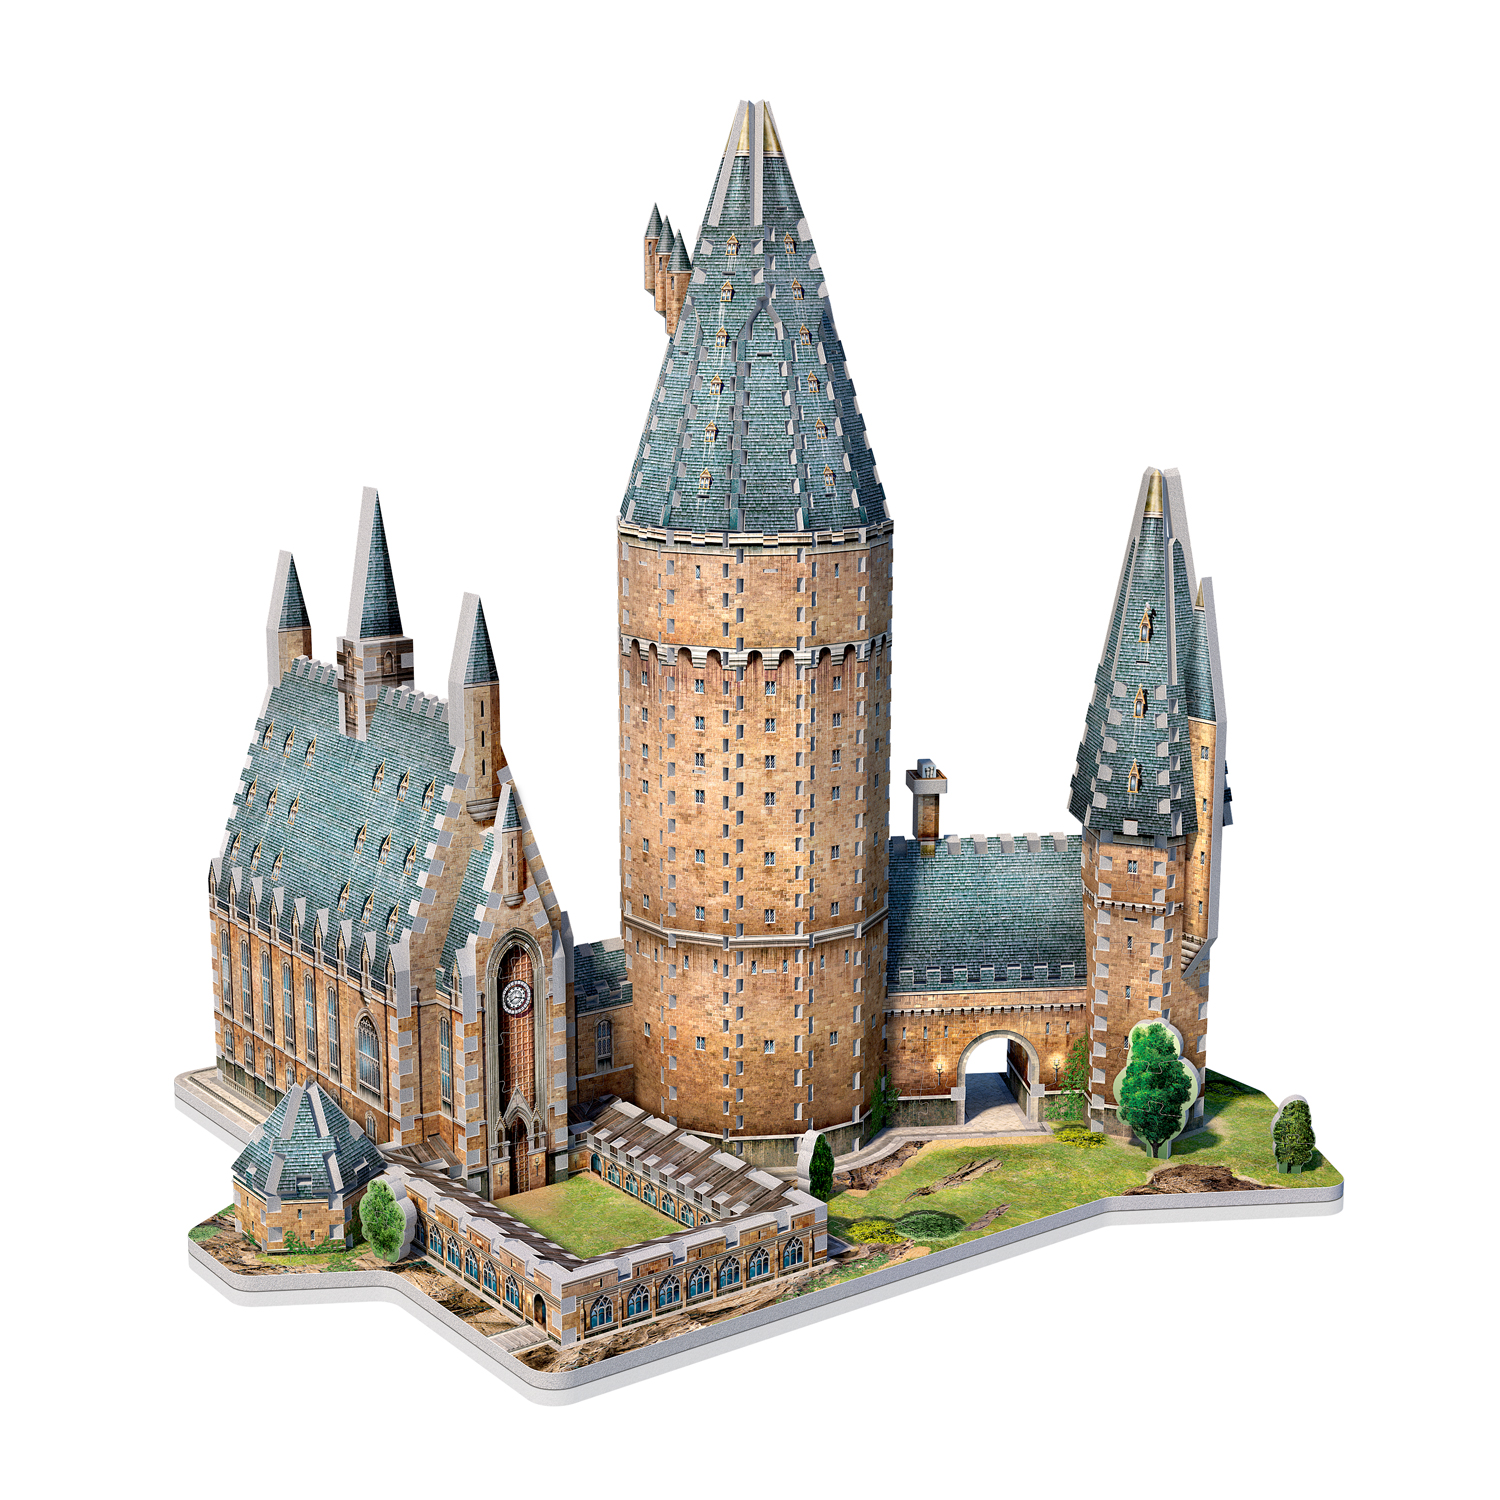 Puzz 3D 2015 WREBBIT--PUZZ 3D--HARRY POTTER--HOGWARTS GREAT WALL PUZZLE 